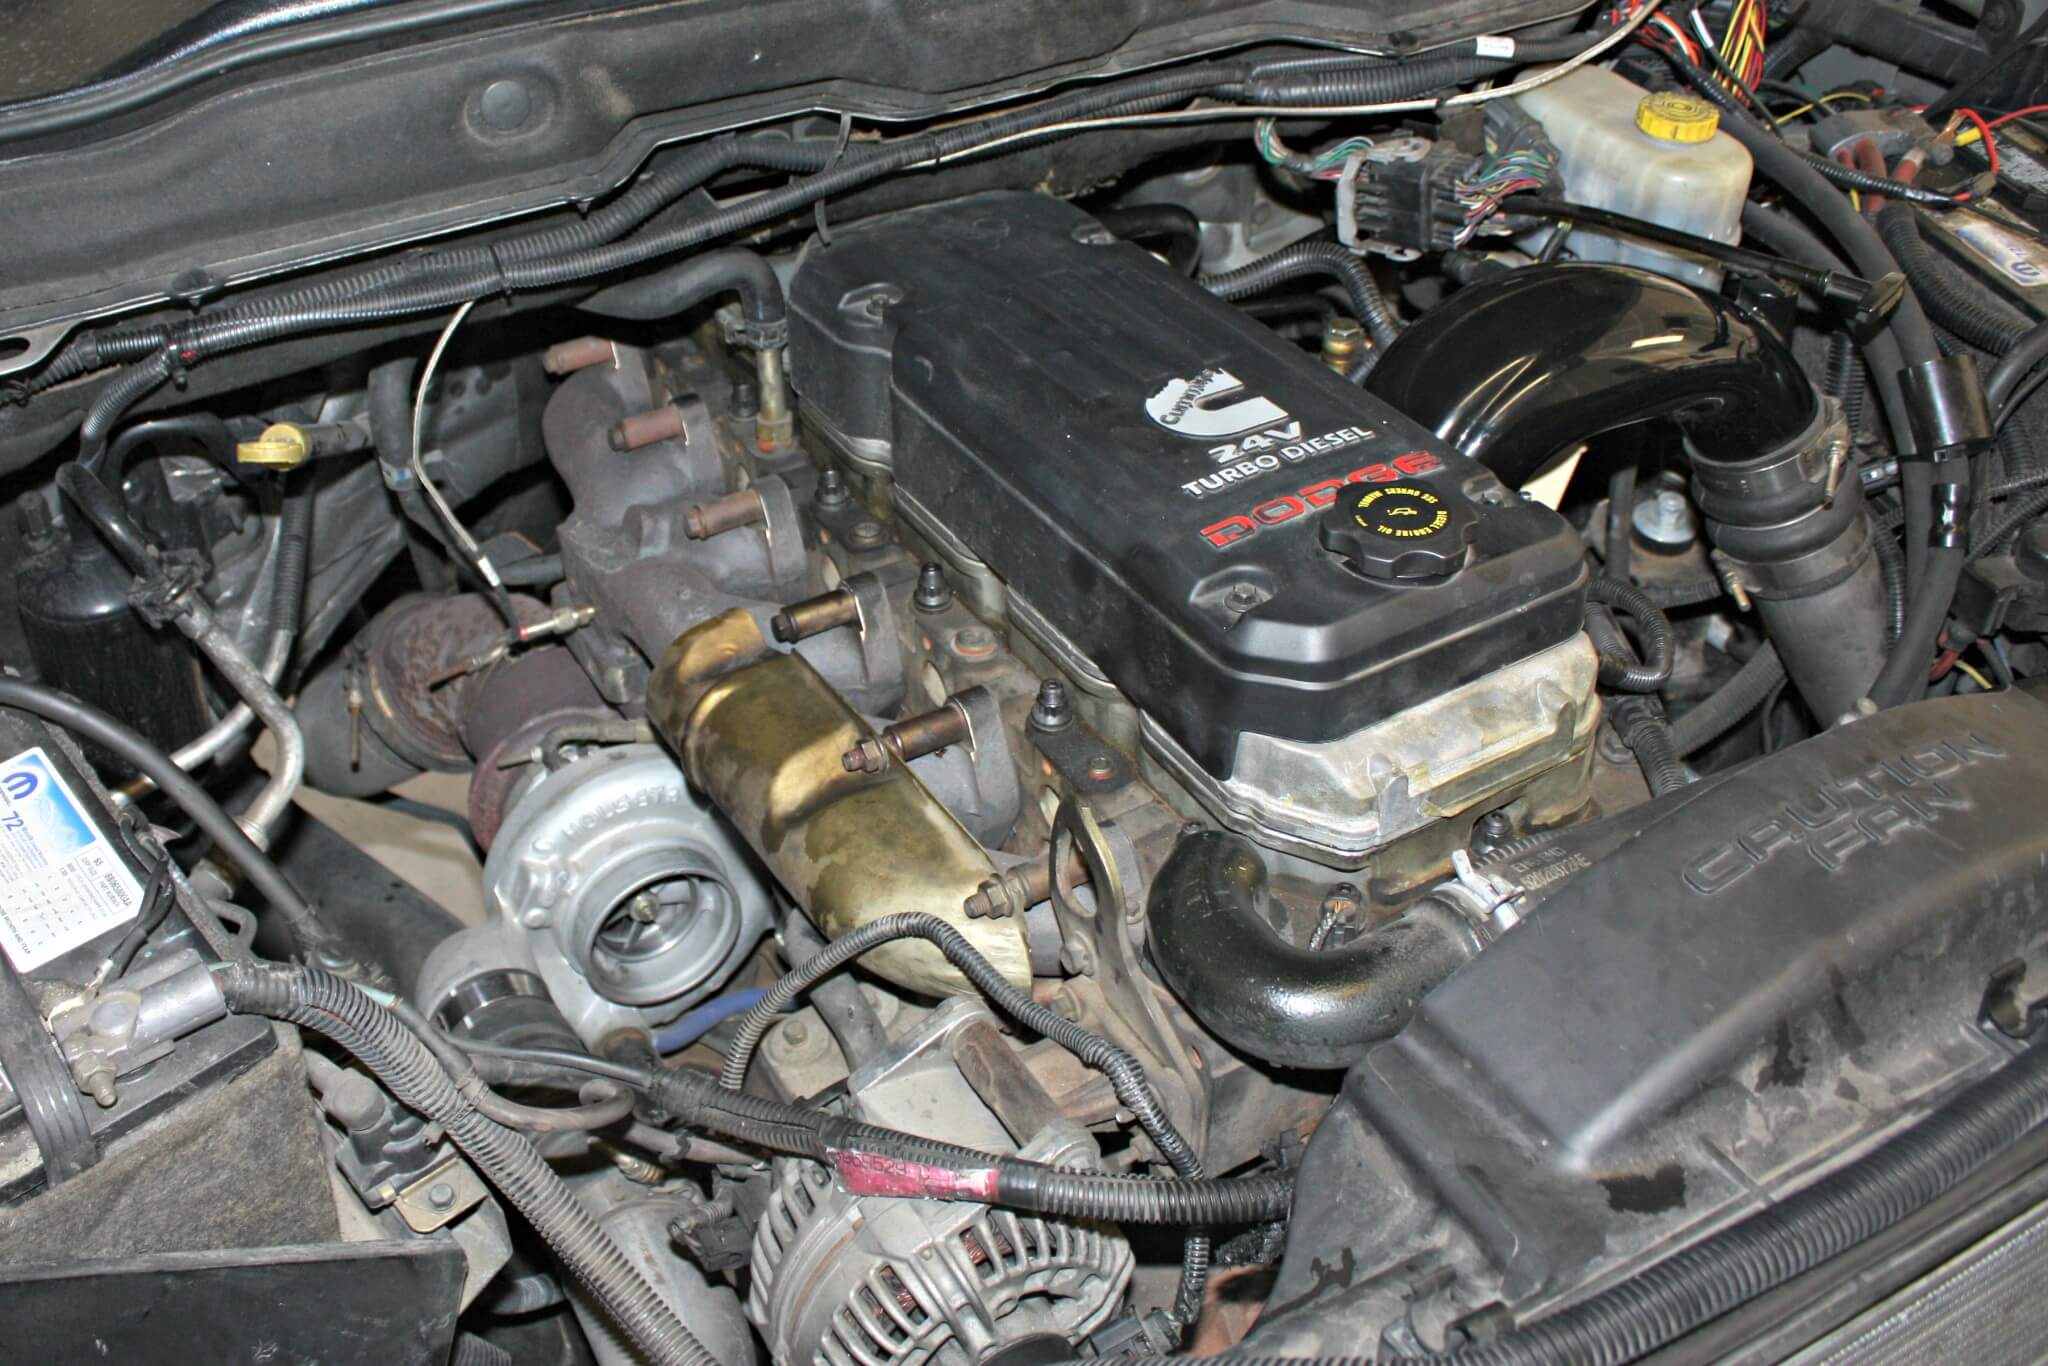 3. The stock-style turbo and manifold are retained, so there’s no reason to remove them from the vehicle.